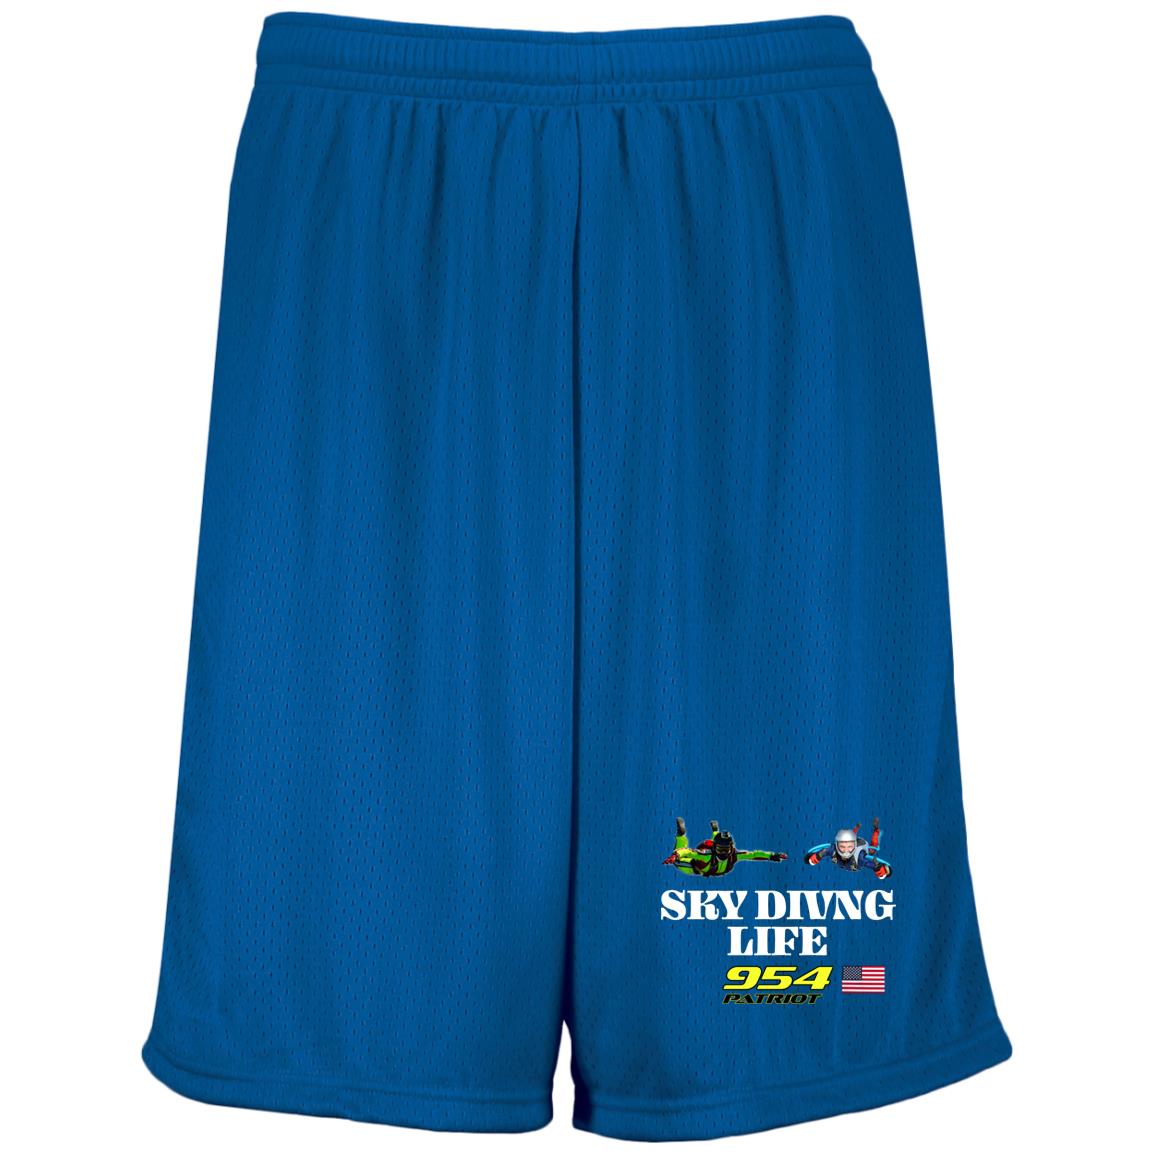 Sky Diver LIfe Moisture-Wicking 9 inch Inseam Mesh Shorts